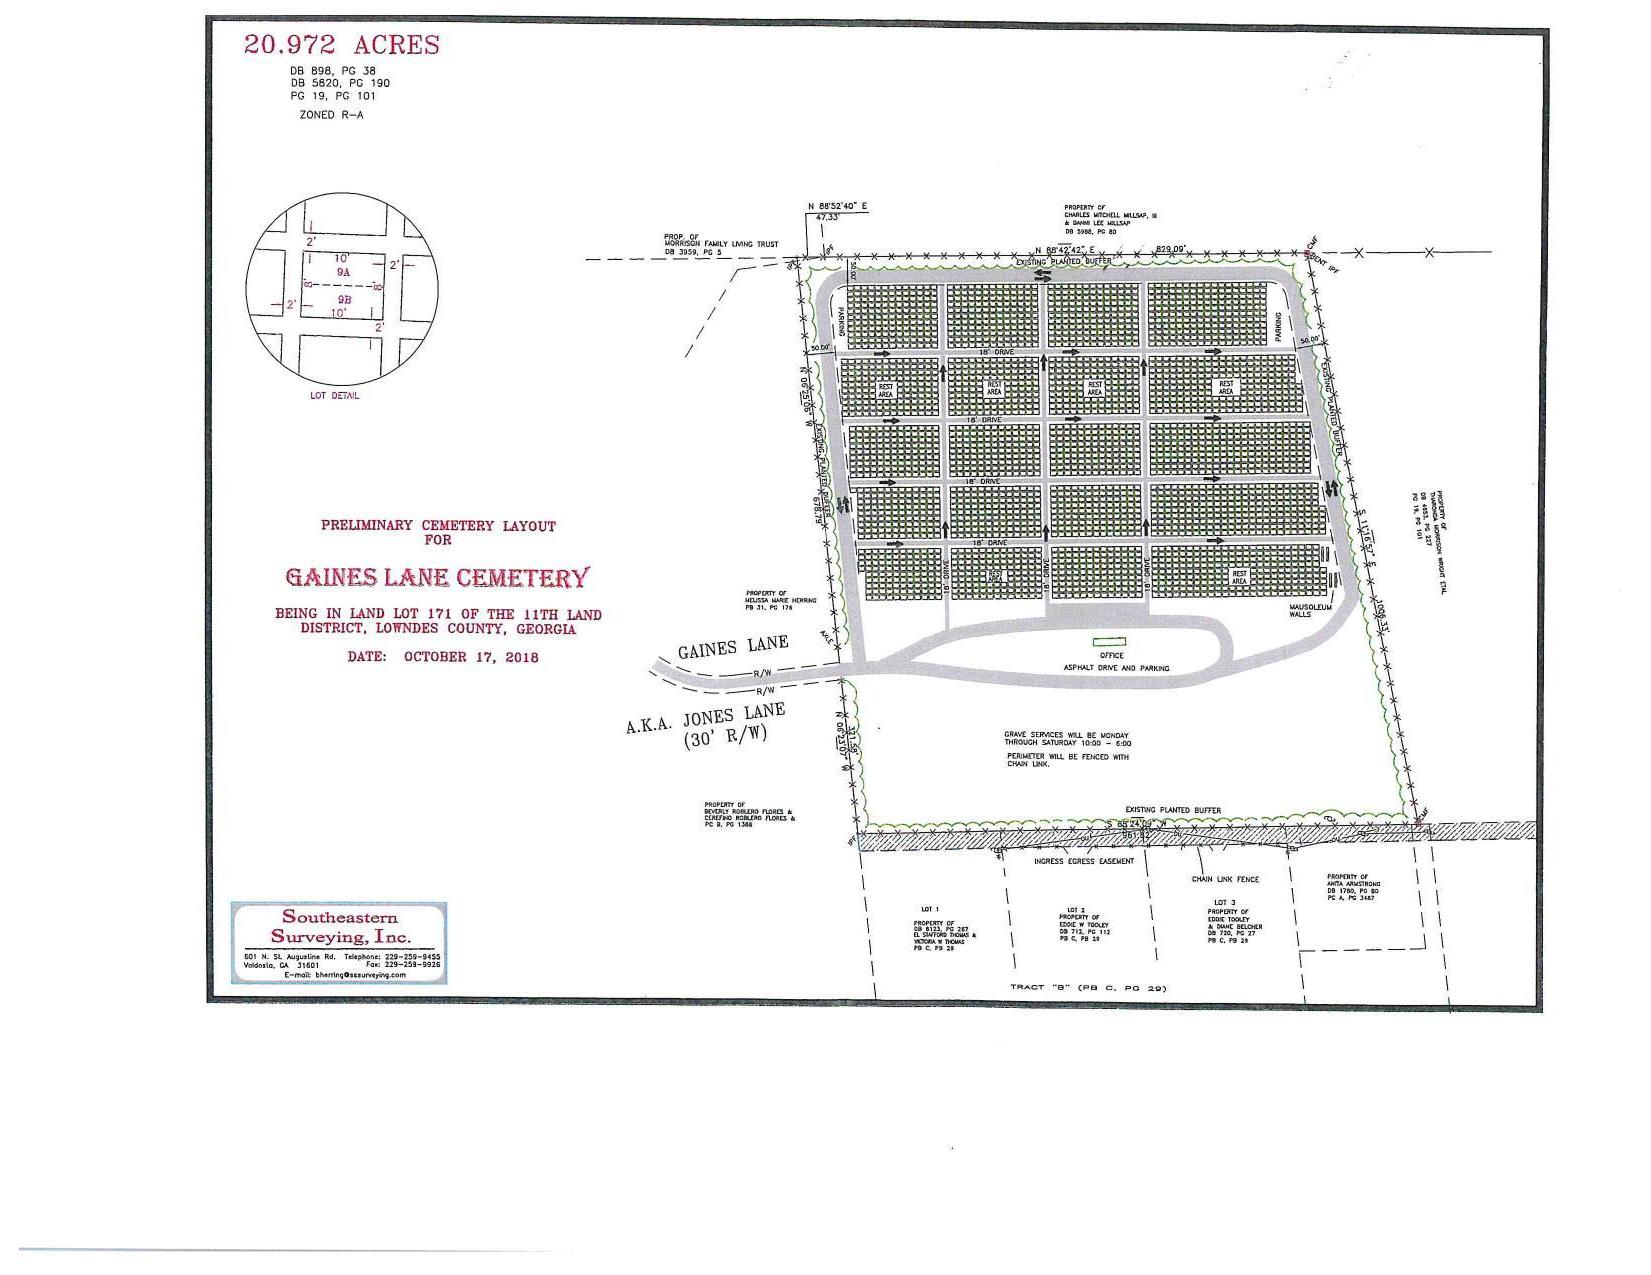 Preliminary Cemetery Layout for Gaines Lane Cemetery